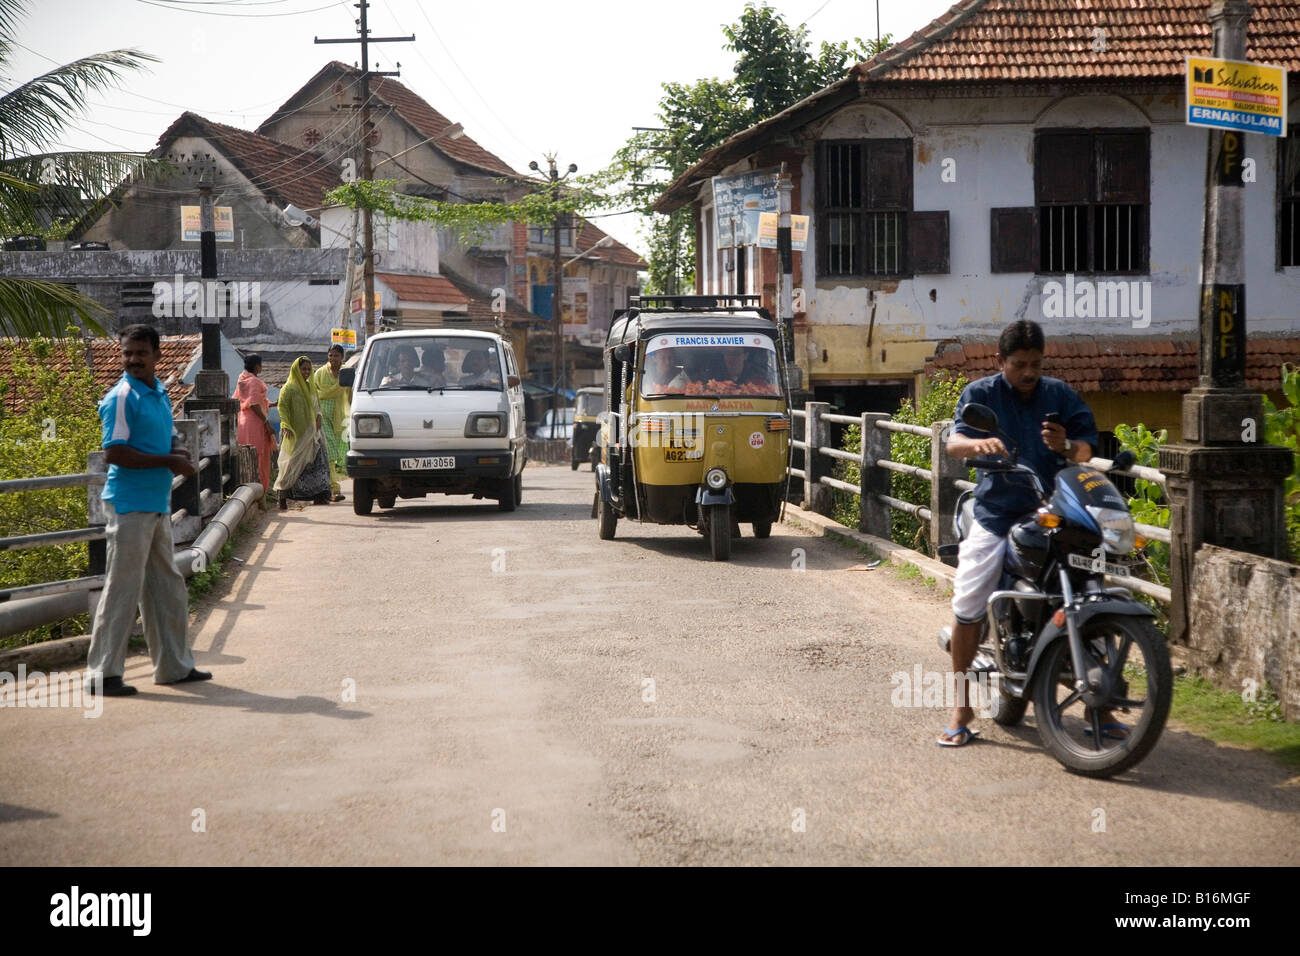 The road between Fort Kochi and Mattancherry in Kochi, India. Pedestrians and motorised transport use the bridge. Stock Photo